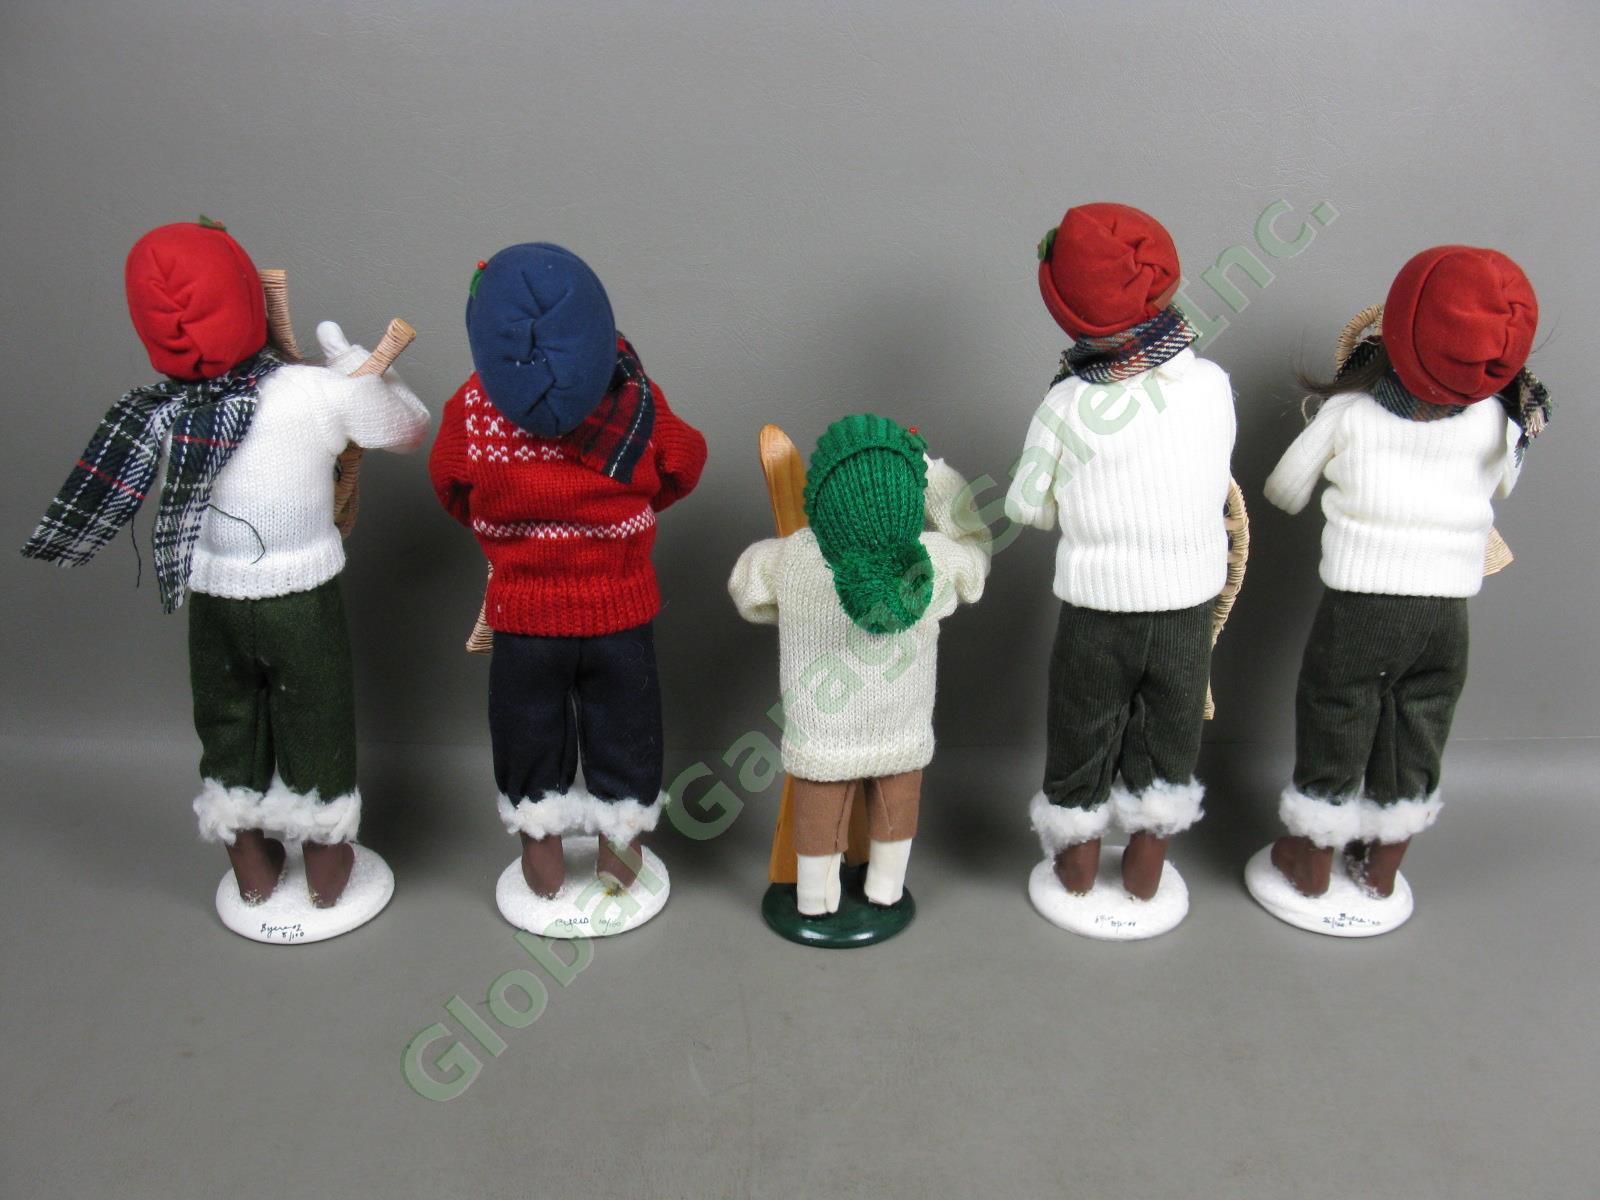 Vtg Byers Choice Carolers Lot Adults With Snowshoes +Boy Skis Signed Ltd Edition 7